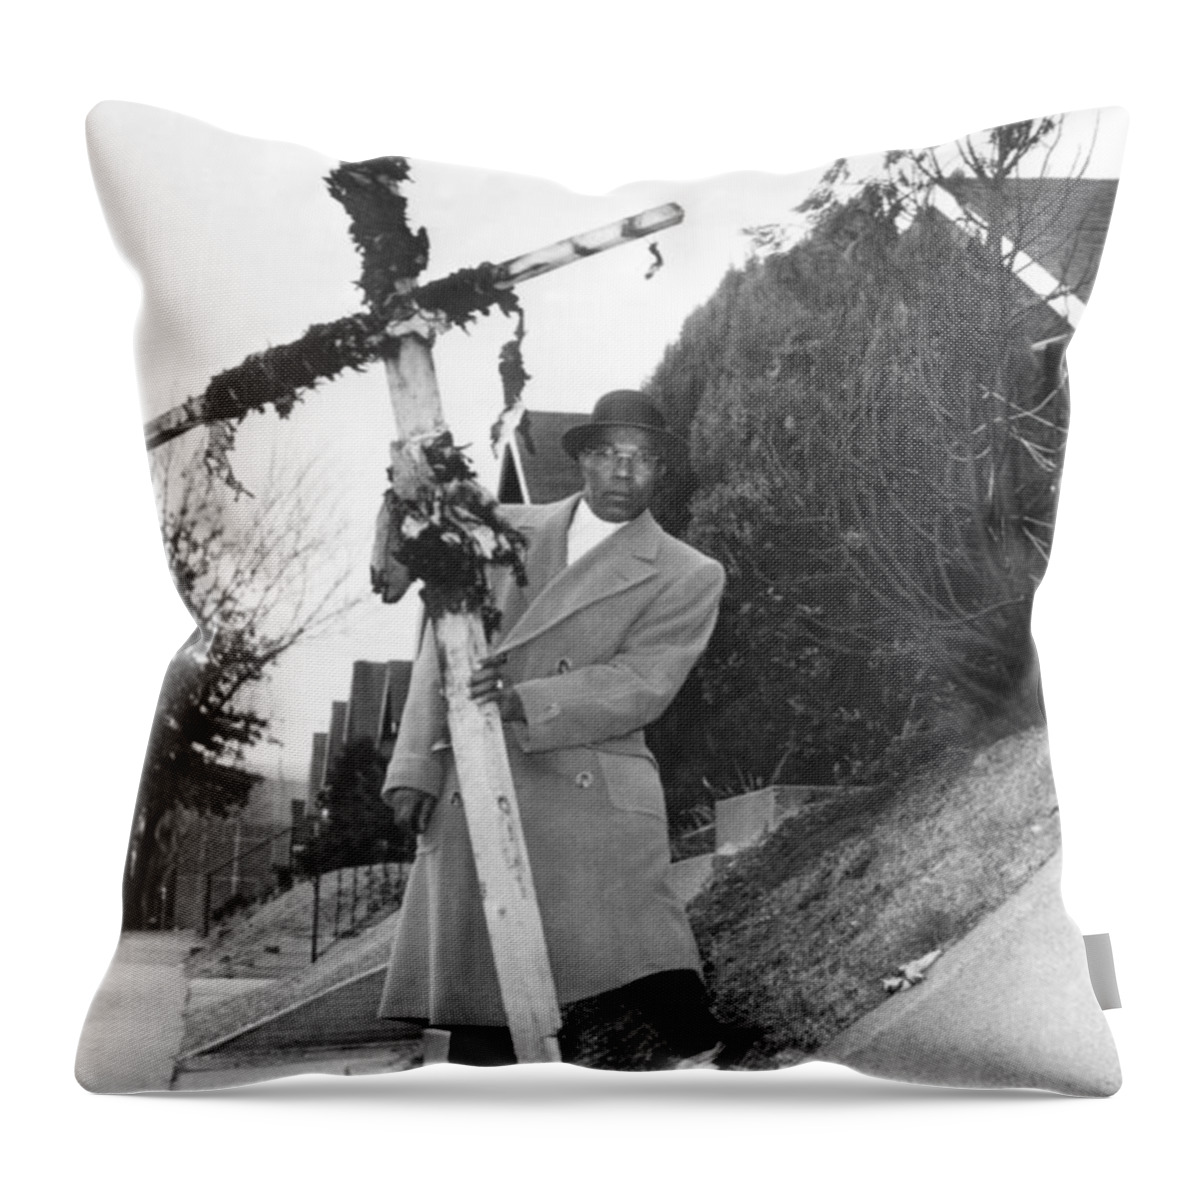 1 Person Throw Pillow featuring the photograph St. Lousi Cross Burning by Underwood Archives